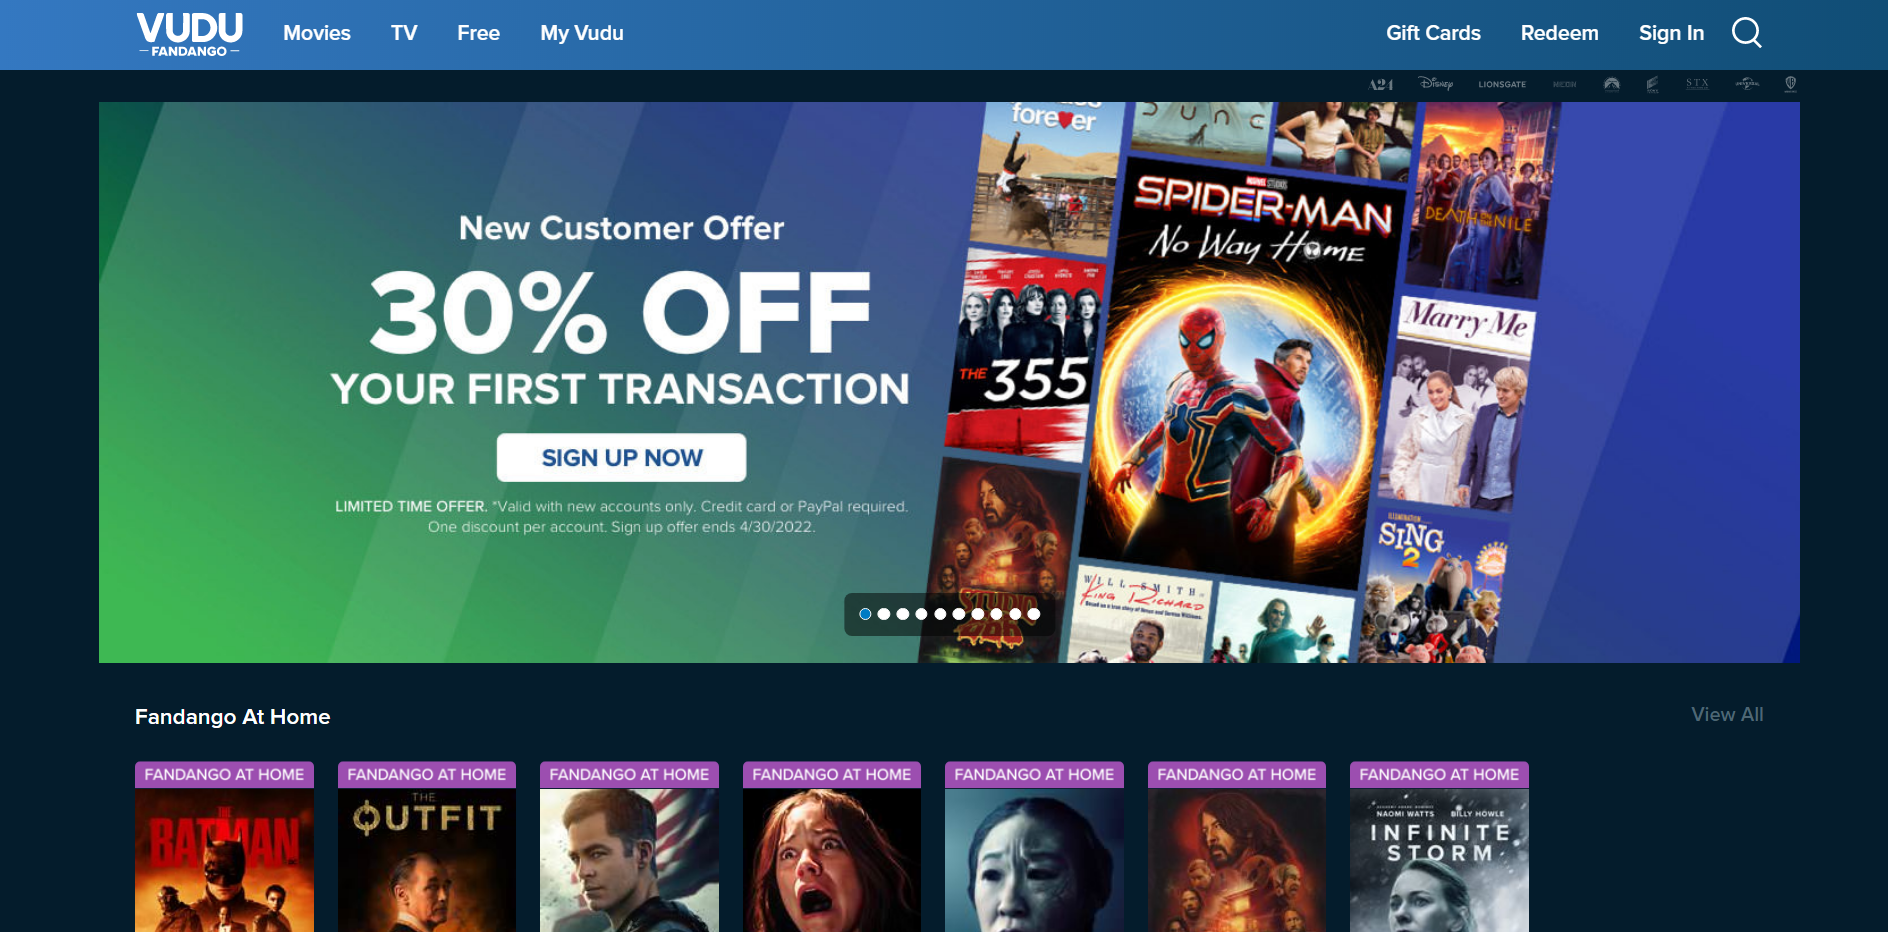 Home Page of Vudu